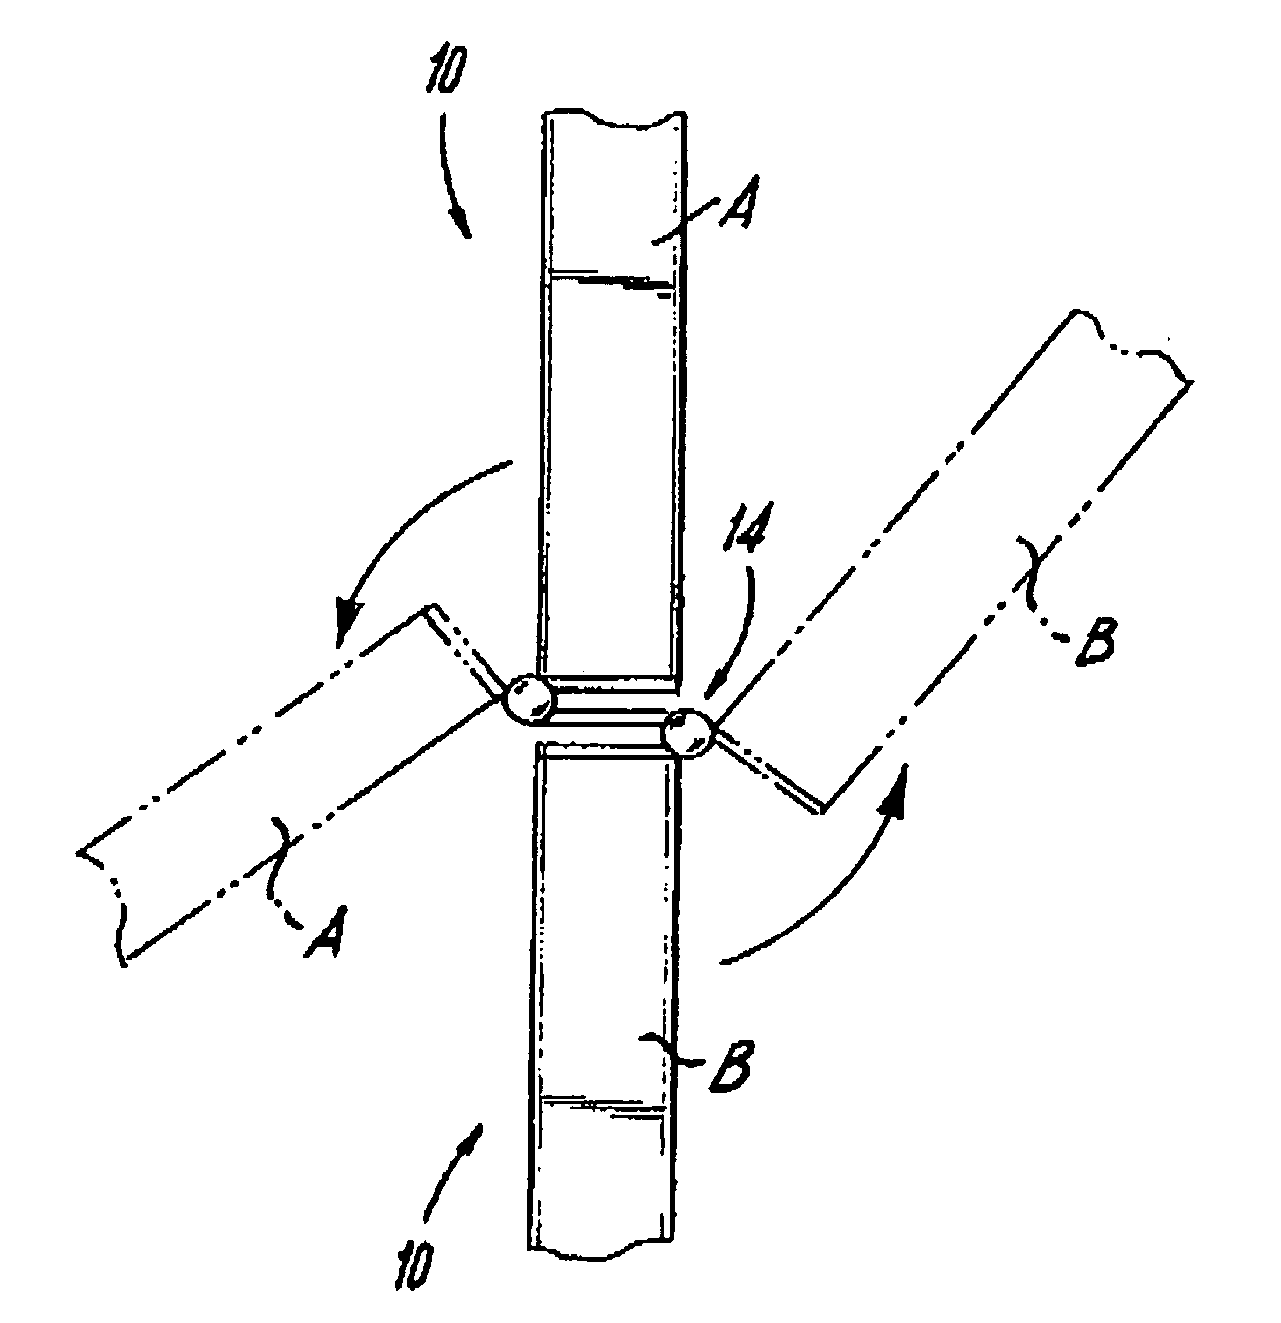 Method of using clips for retrofit installation of a portable swimming pool barrier fence